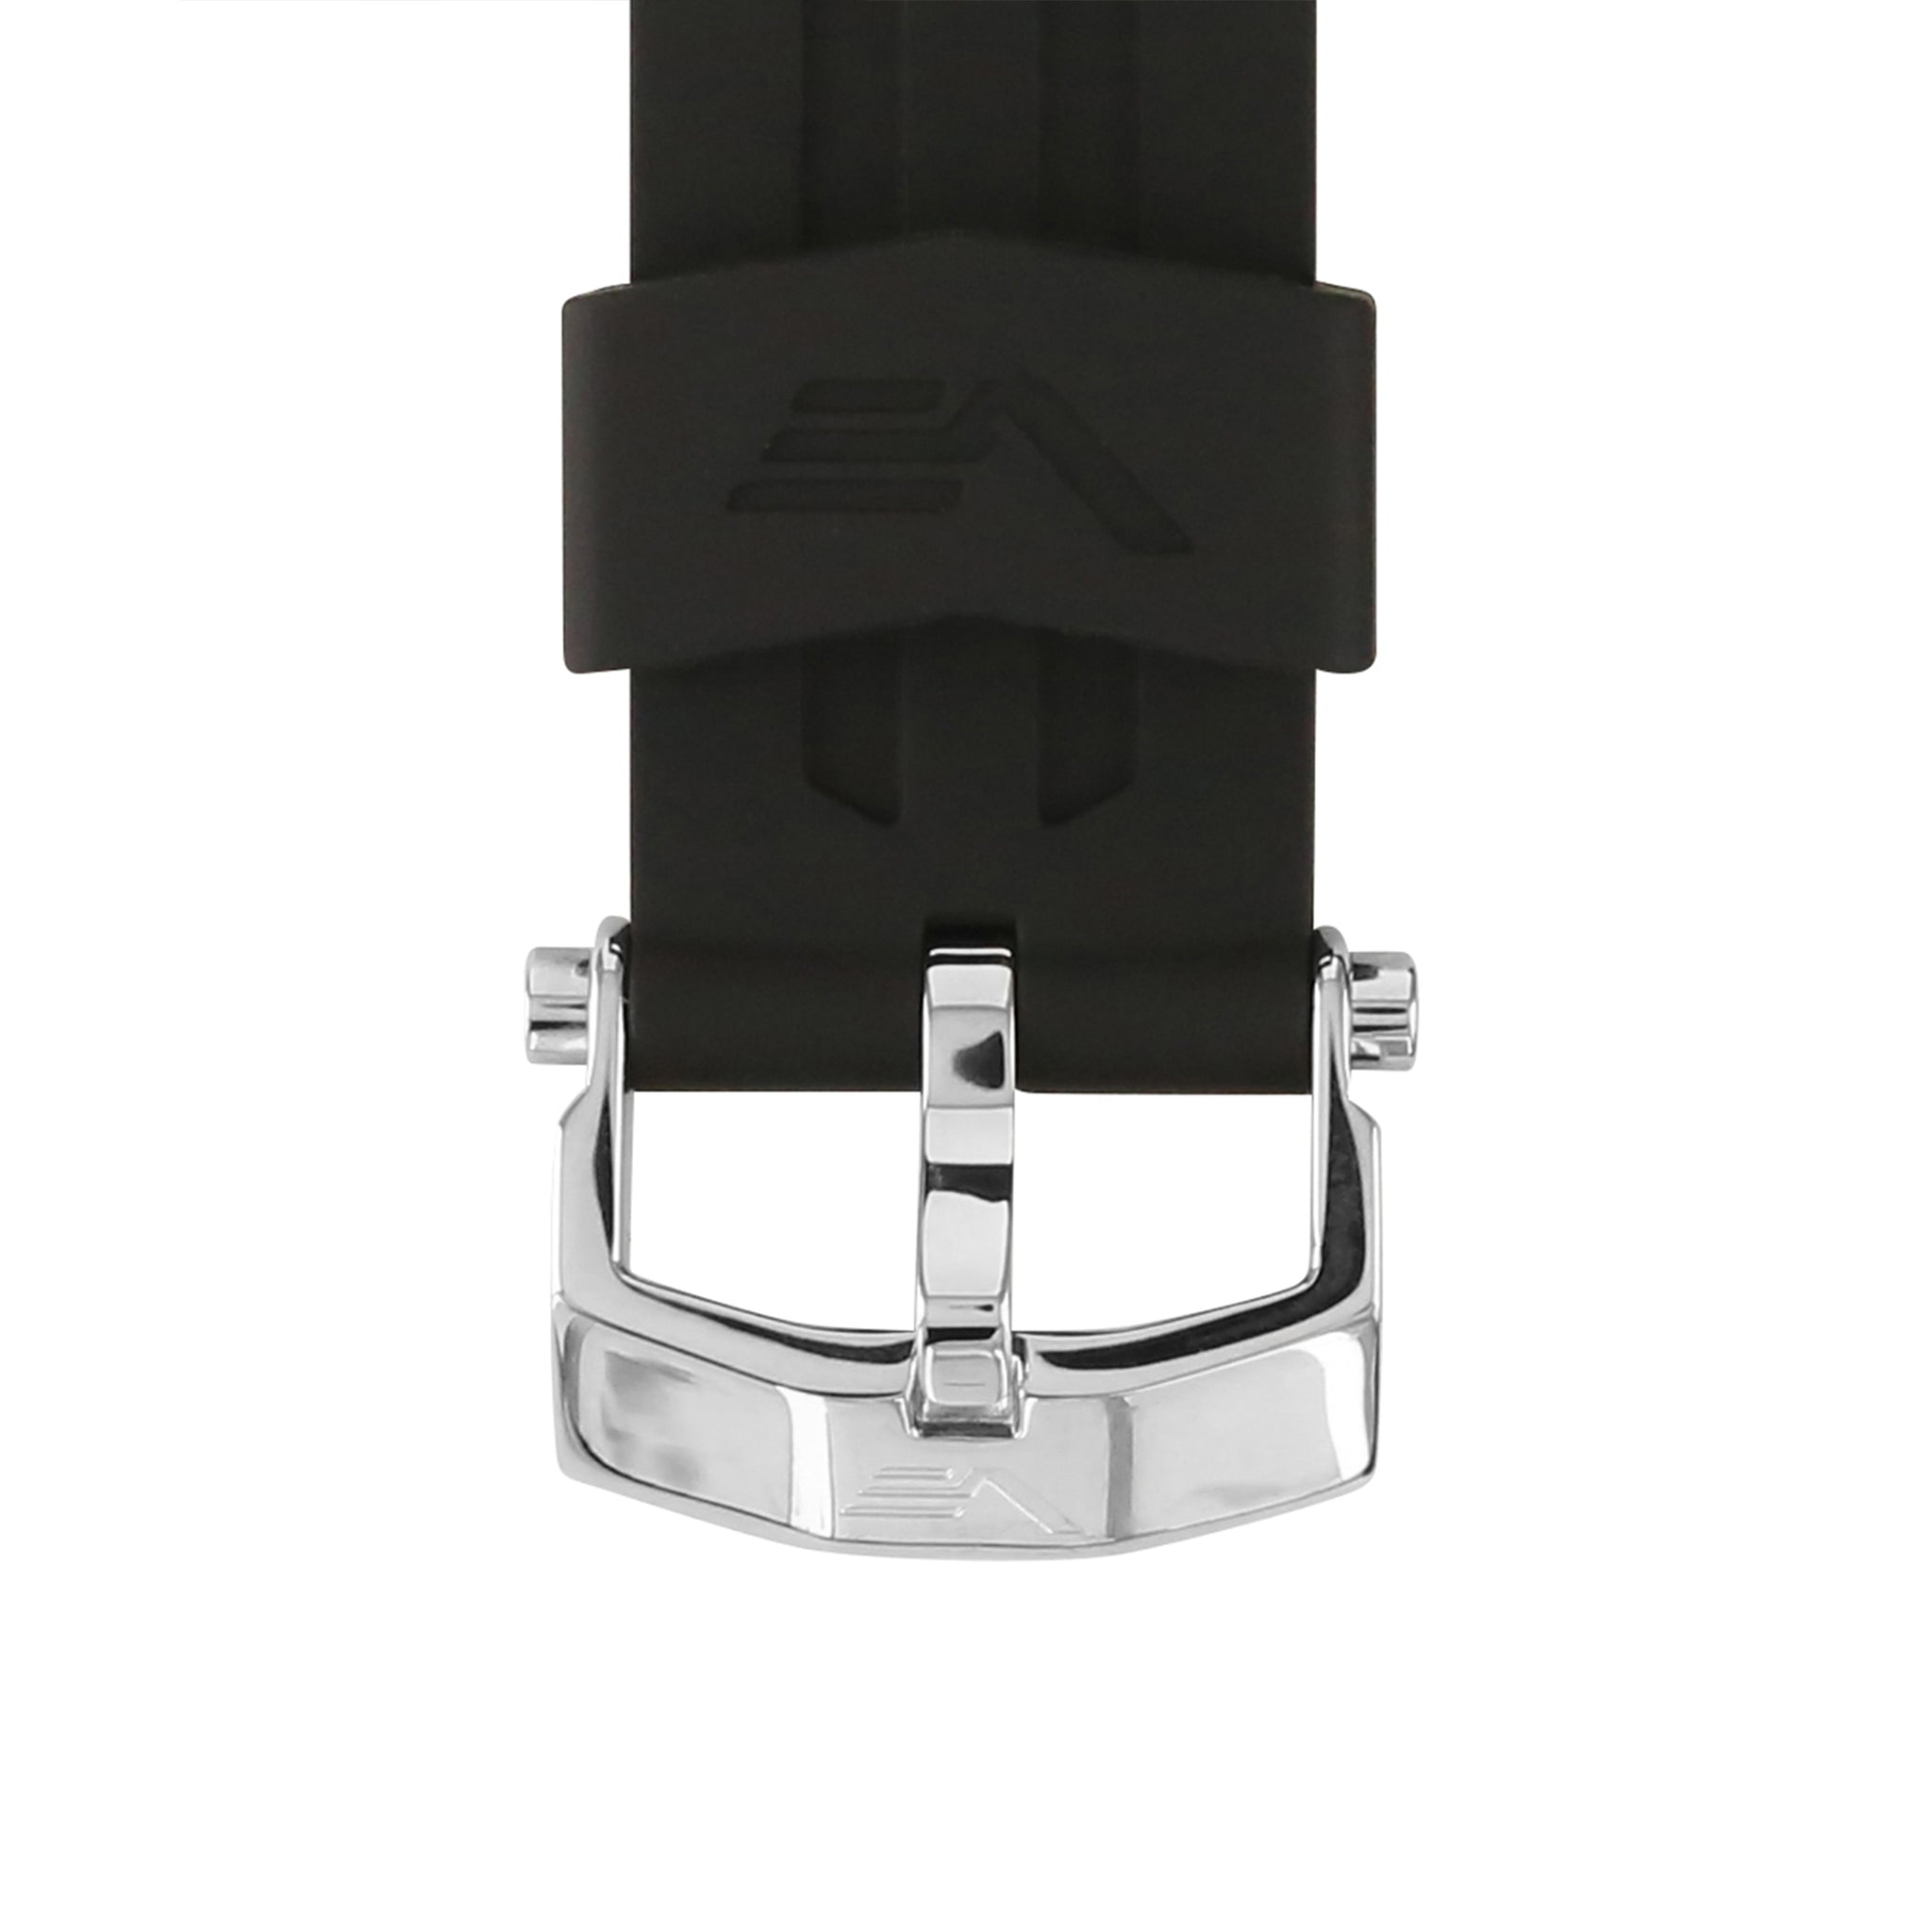 ENERGIA BLACK SILICONE STRAP 26mm - POLISHED BUCKLE